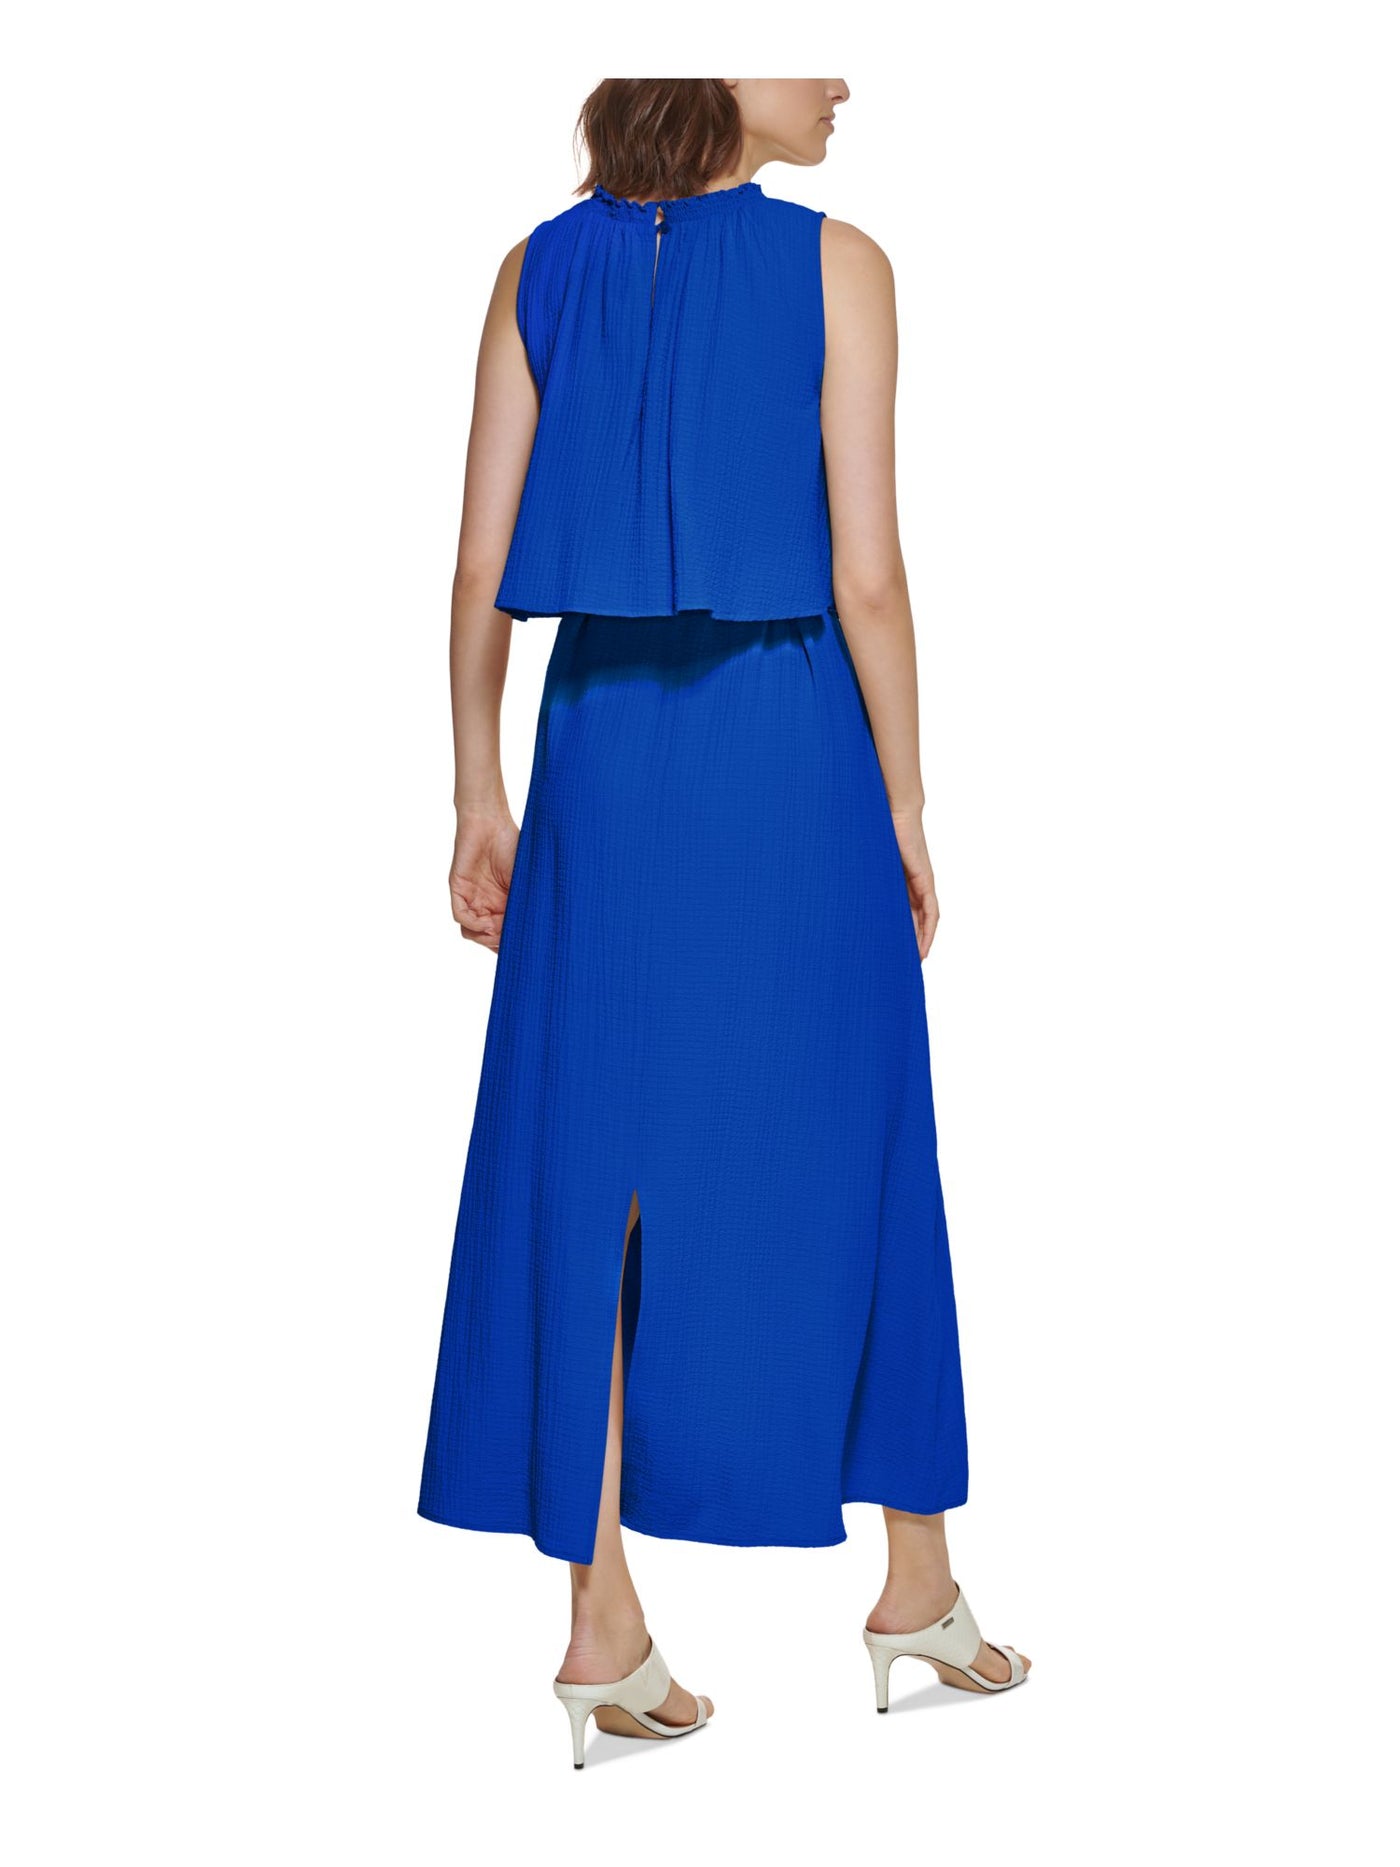 CALVIN KLEIN Womens Blue Smocked Ruffled Keyhole Back Closure Popover Sleeveless Round Neck Maxi Wear To Work Fit + Flare Dress 14